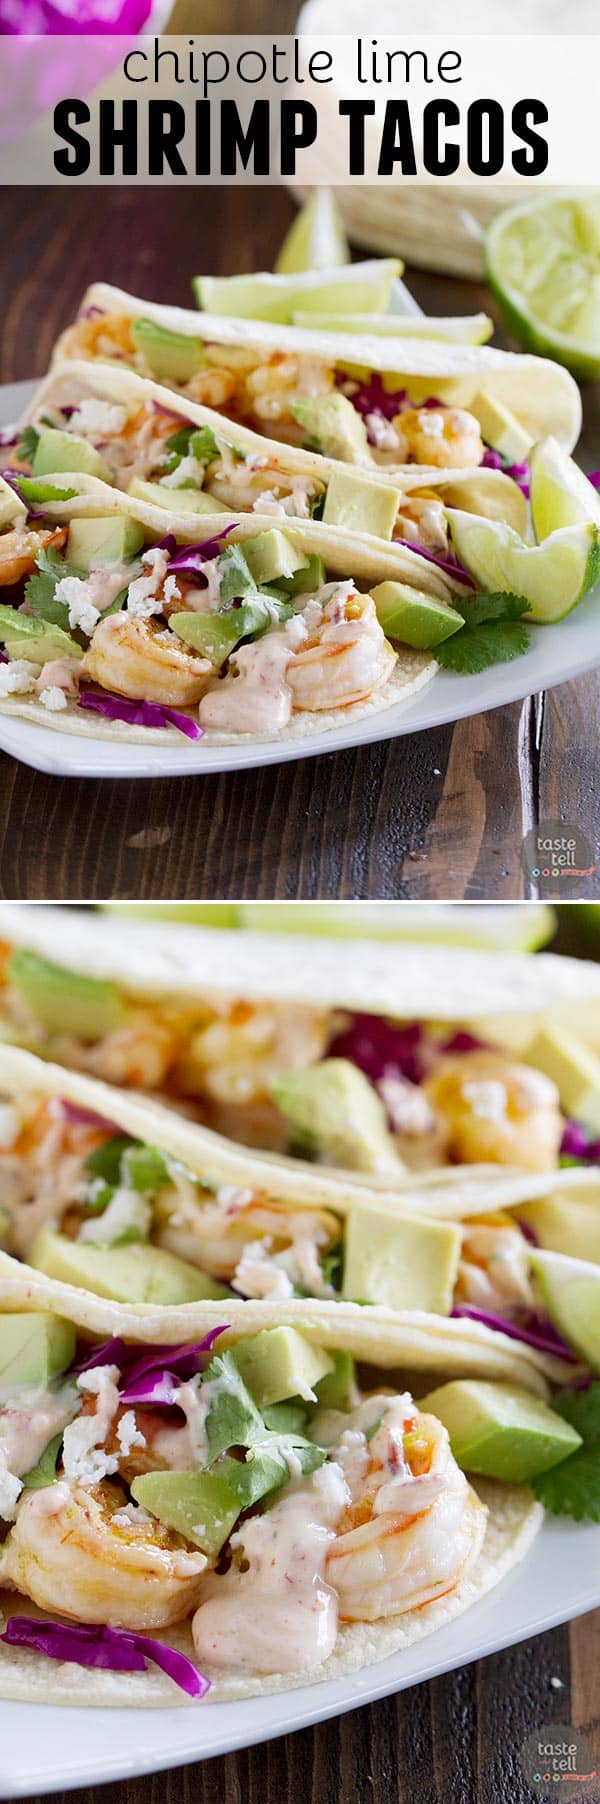 Dinner comes together in a snap with this Chipotle Lime Shrimp Tacos Recipe.  There is no excuse to not have a homemade meal on the table when dinner is this easy!